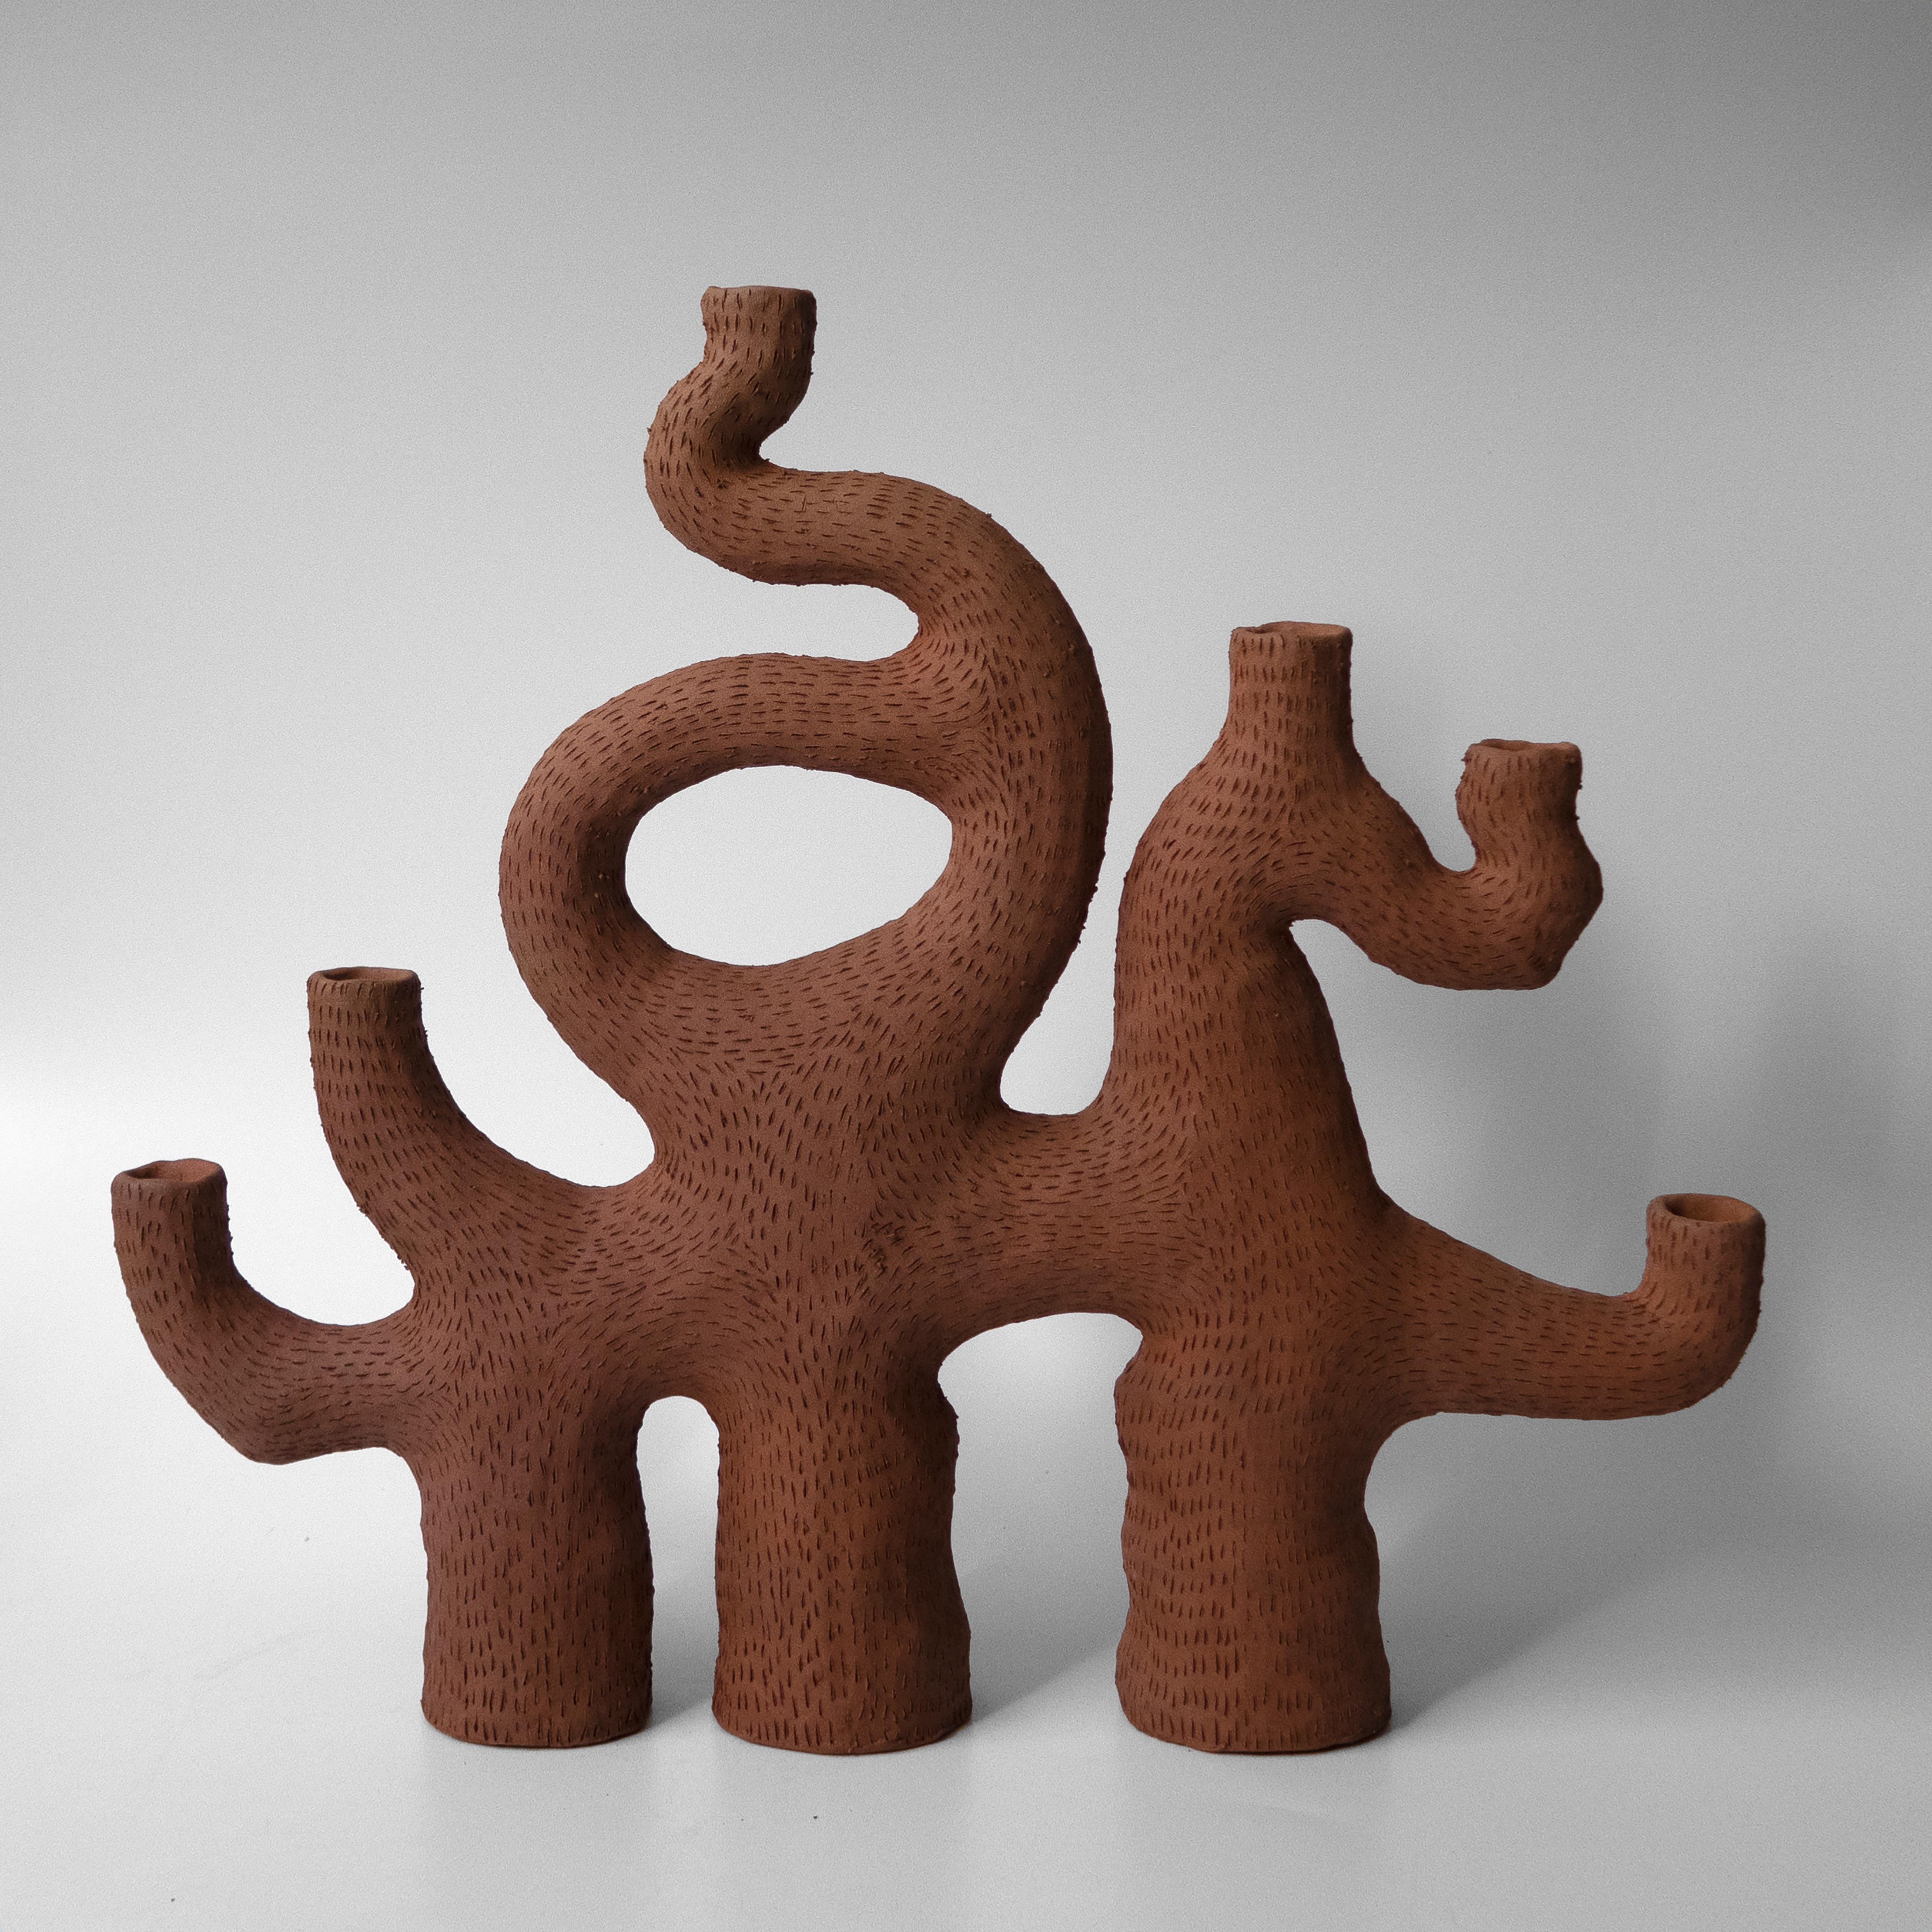 Unique sea candelabra by Jan Ernst
Dimensions: W 45 D 12.5 H 48 cm
Materials: Terracotta, stoneware, black clay

Glazed to client specification
Other dimensions available
6 arms 3 legs.

The work is influenced by his fascination with natural